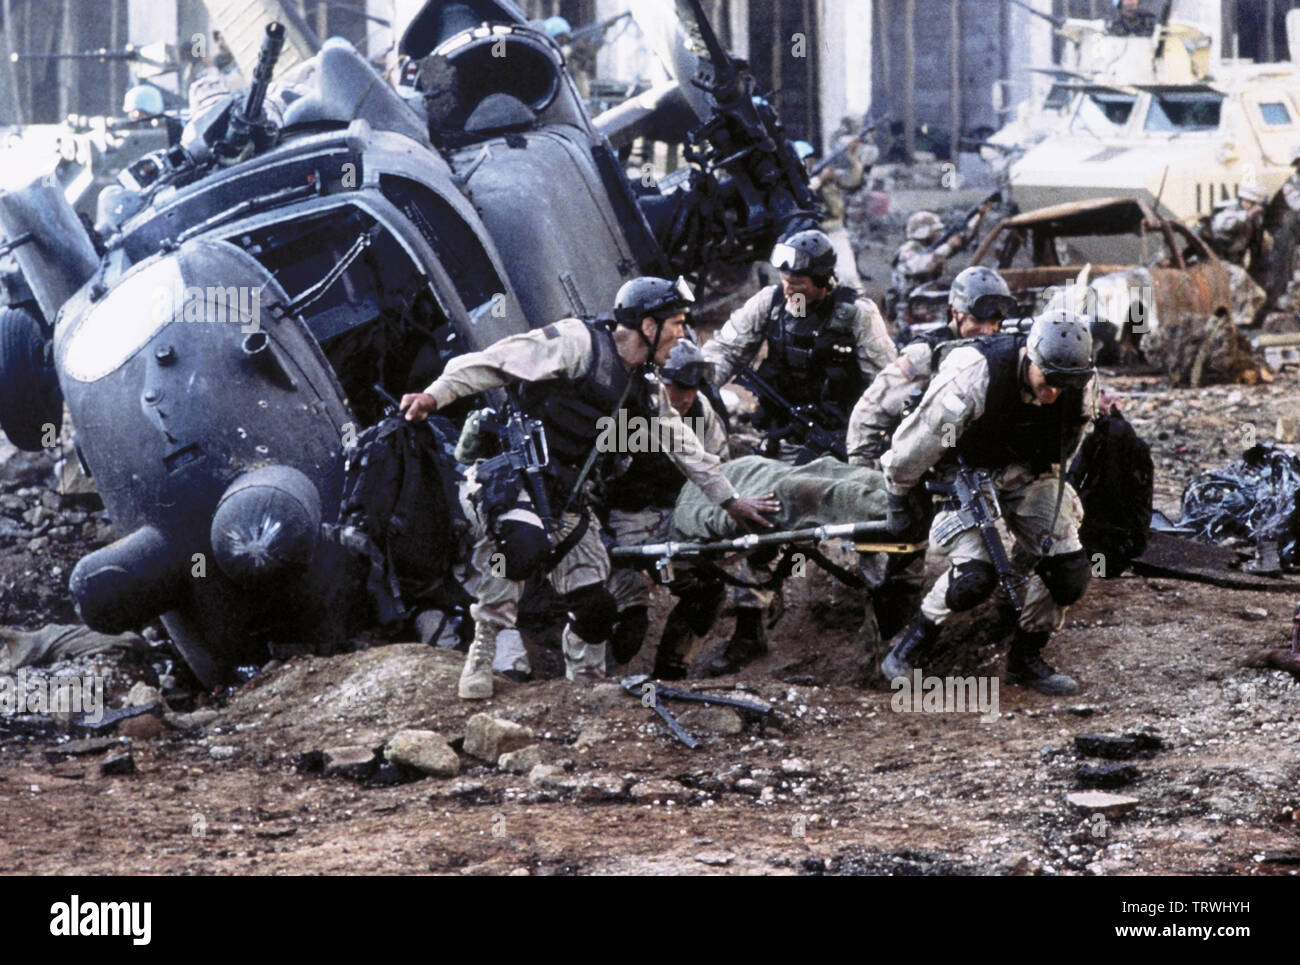 BLACK HAWK DOWN (2001). Copyright: Editorial use only. No merchandising or book covers. This is a publicly distributed handout. Access rights only, no license of copyright provided. Only to be reproduced in conjunction with promotion of this film. Credit: REVOLUTION STUDIOS / BALDWIN, SIDNEY / Album Stock Photo